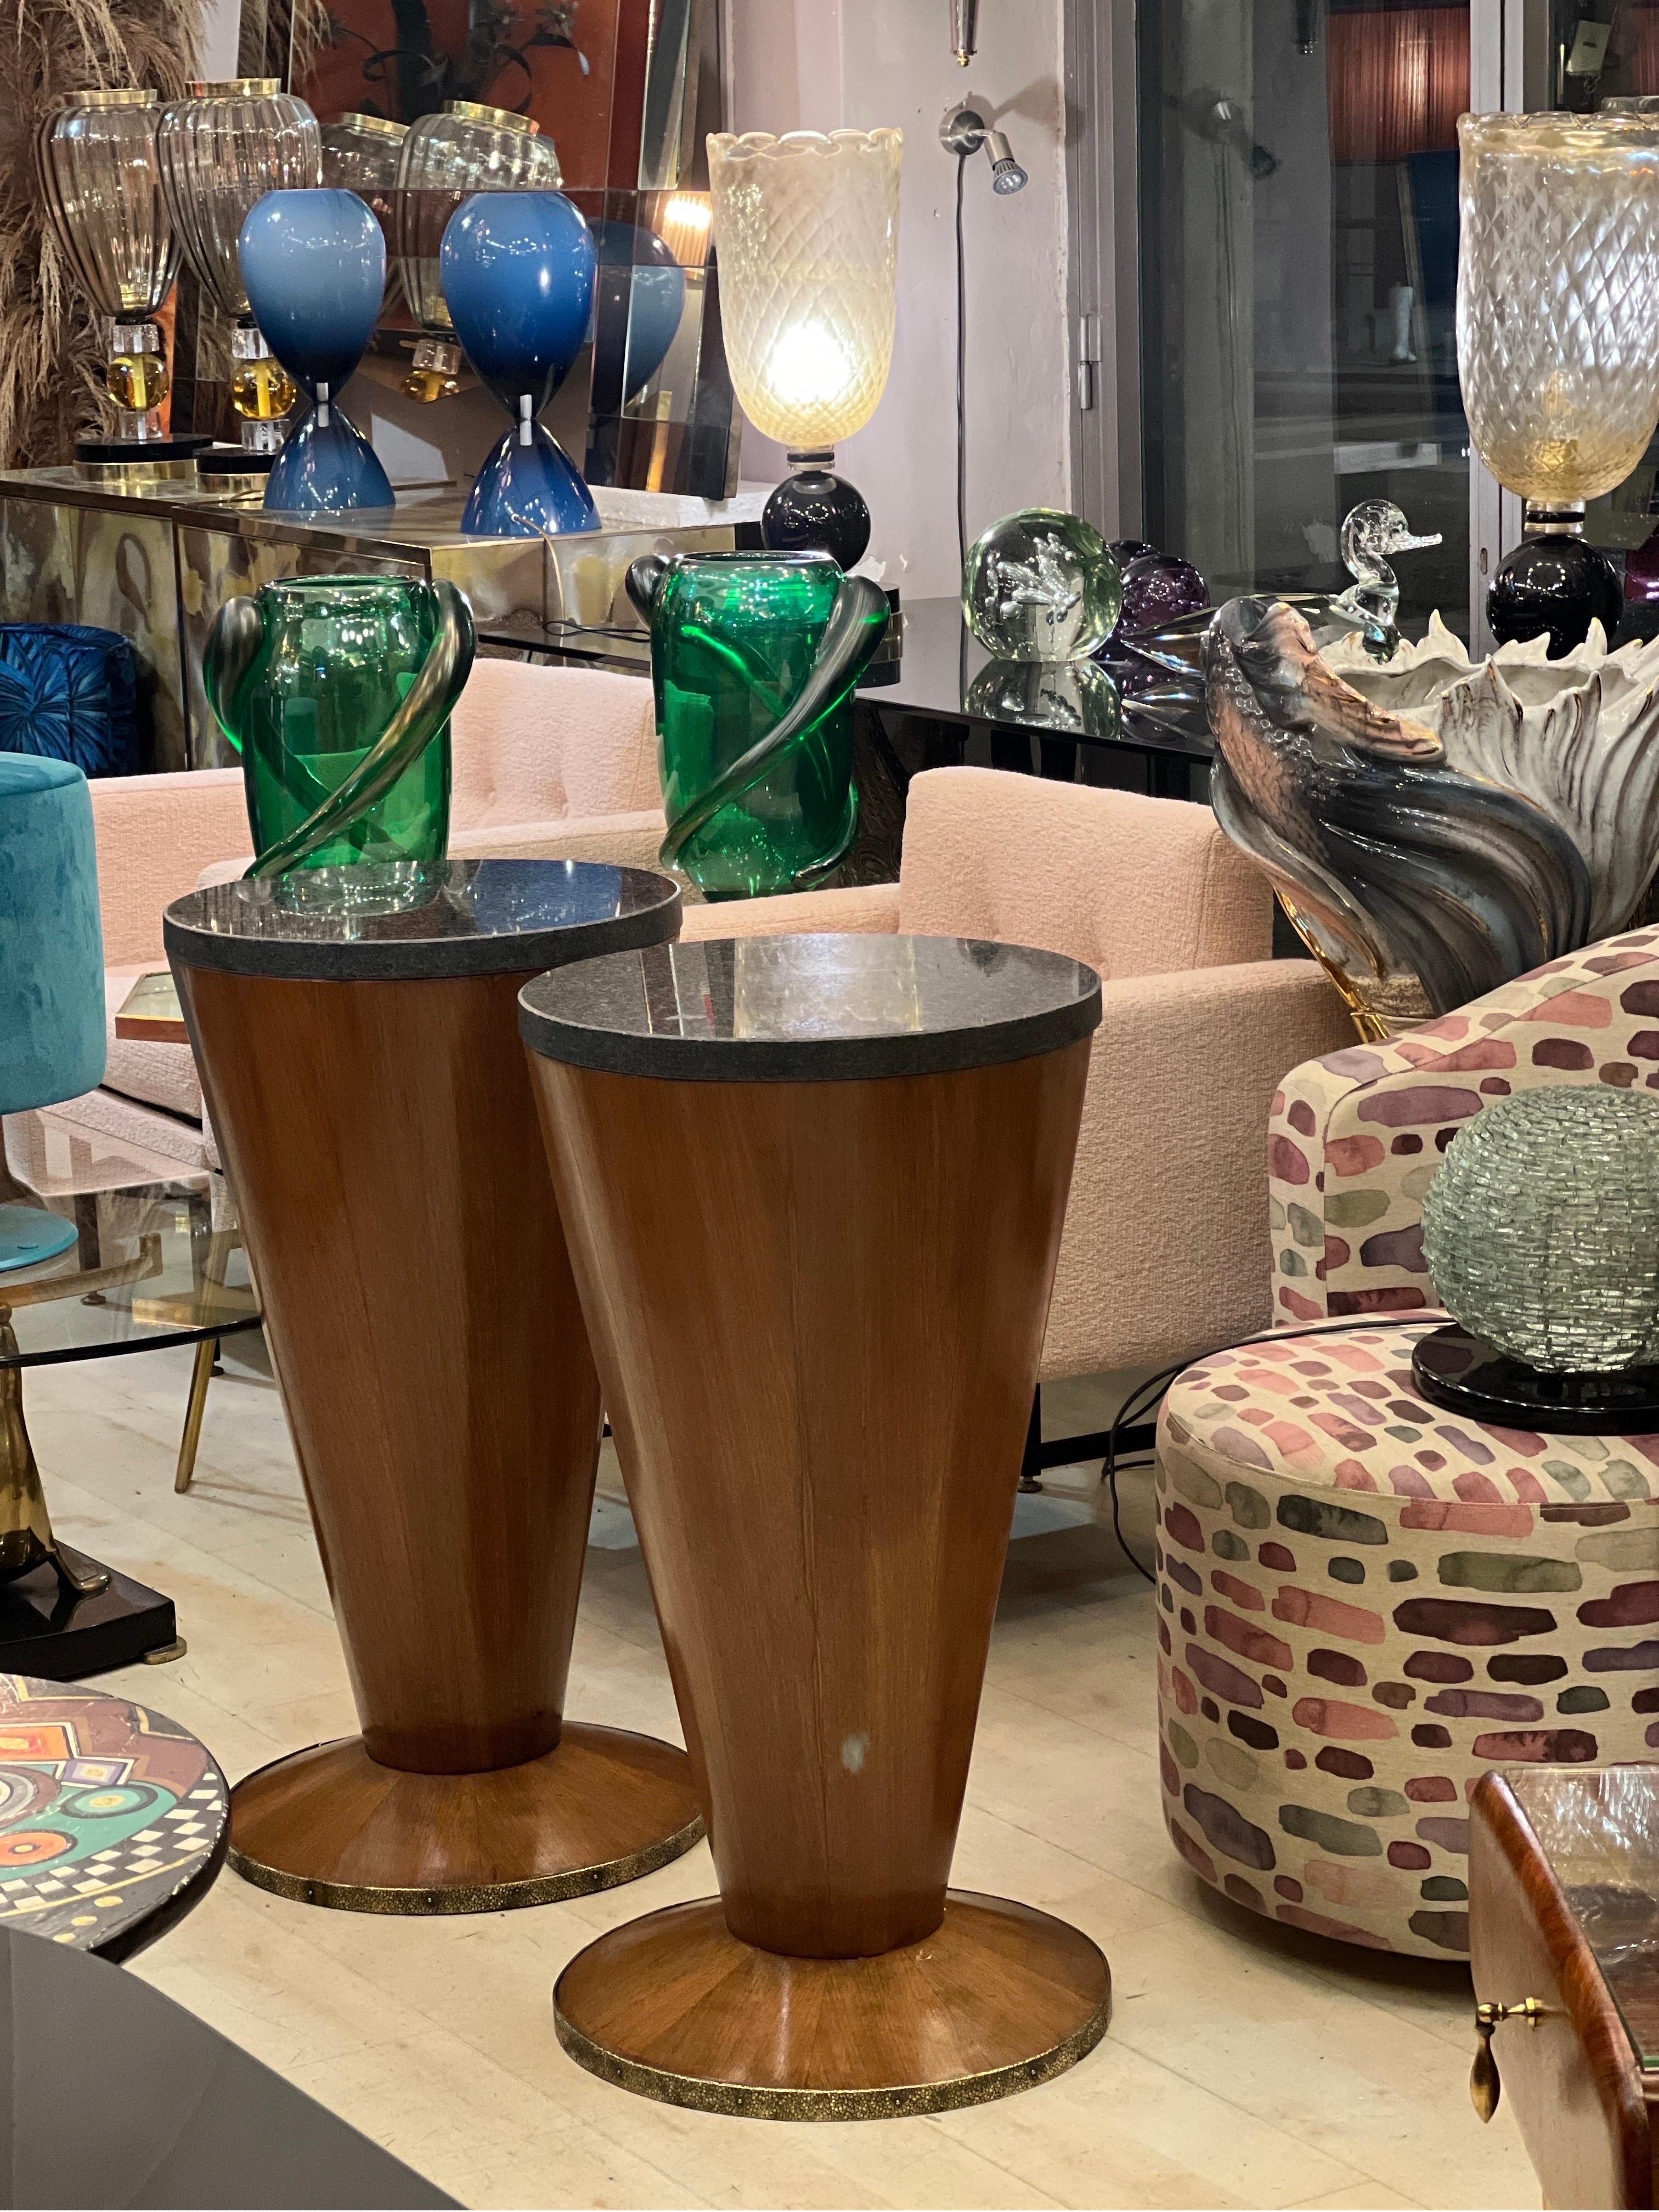 Pair of Art Deco Conical Cherry Wood Side Tables with Marble Top 1940s For Sale 6